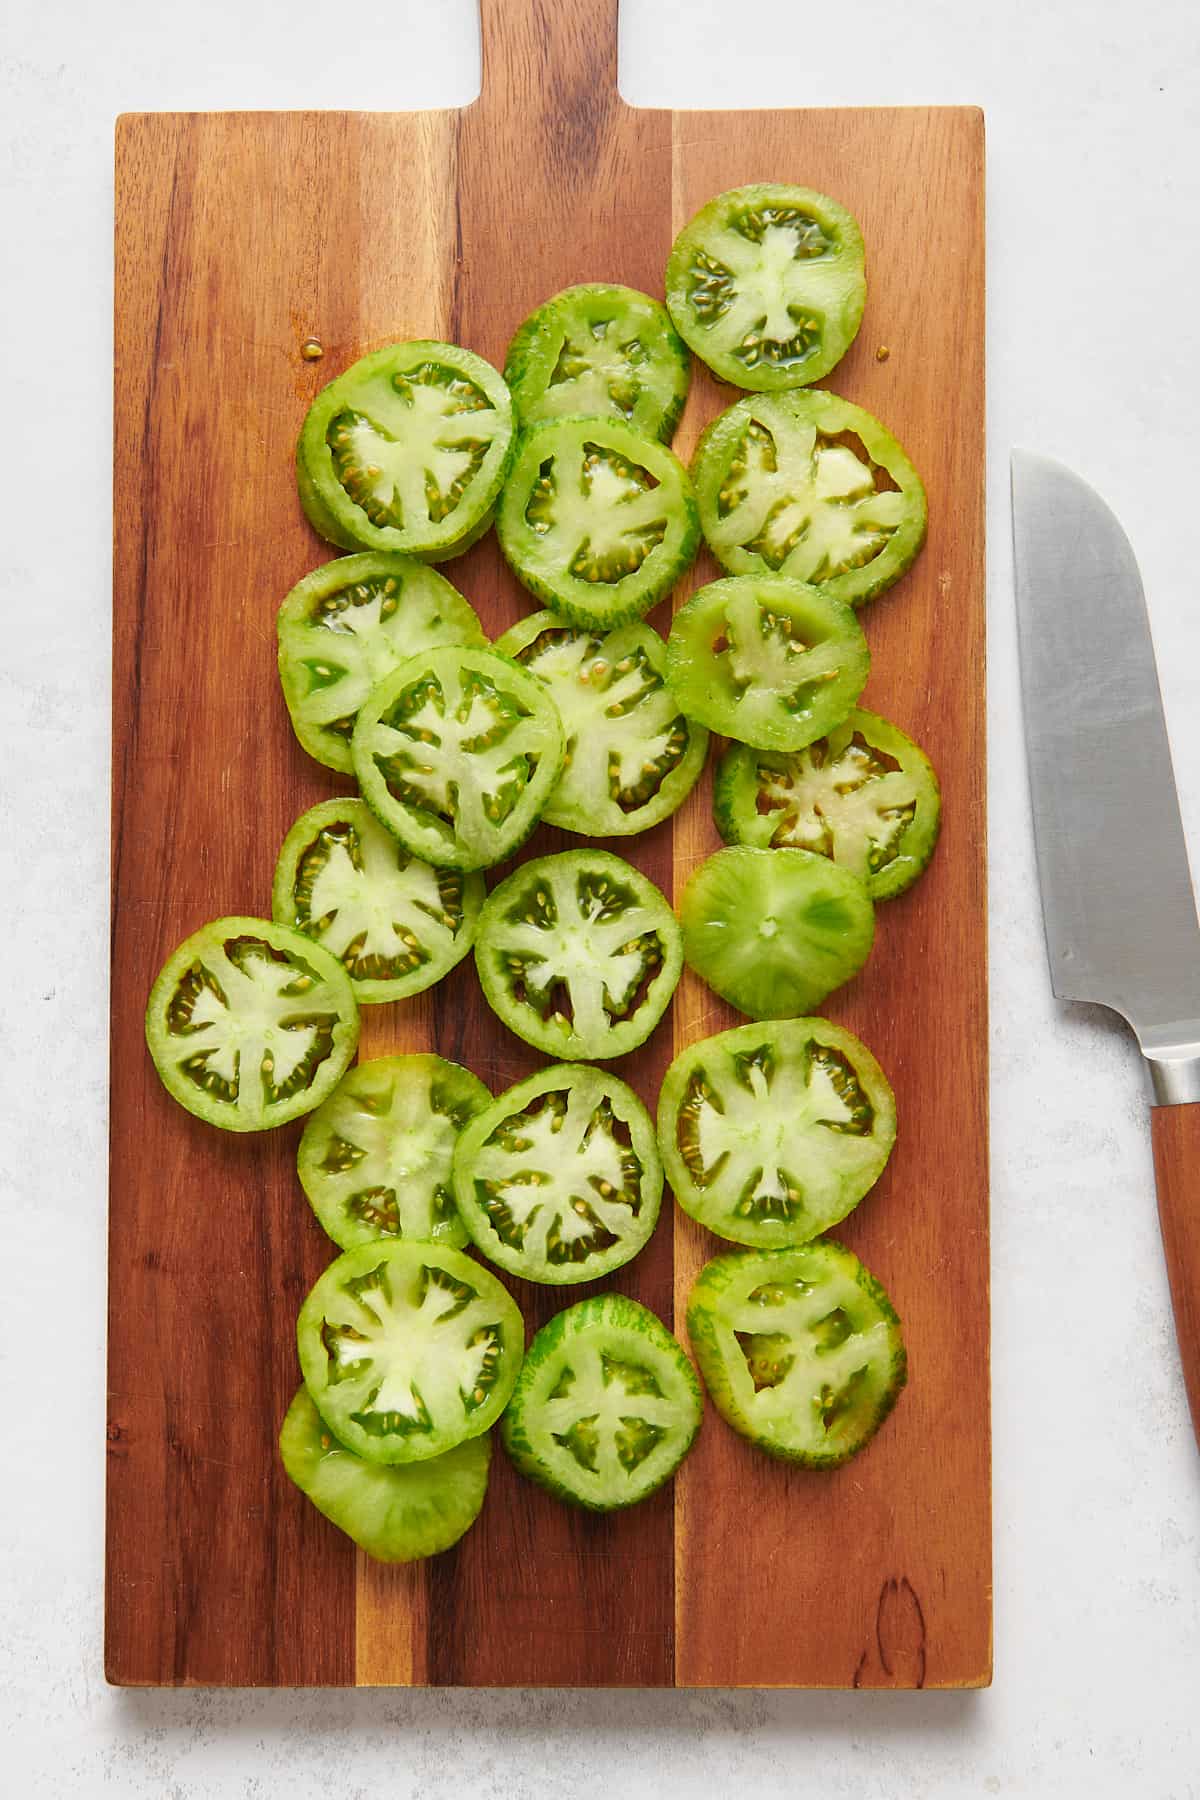 sliced green tomatoes sitting on a wooden cutting board